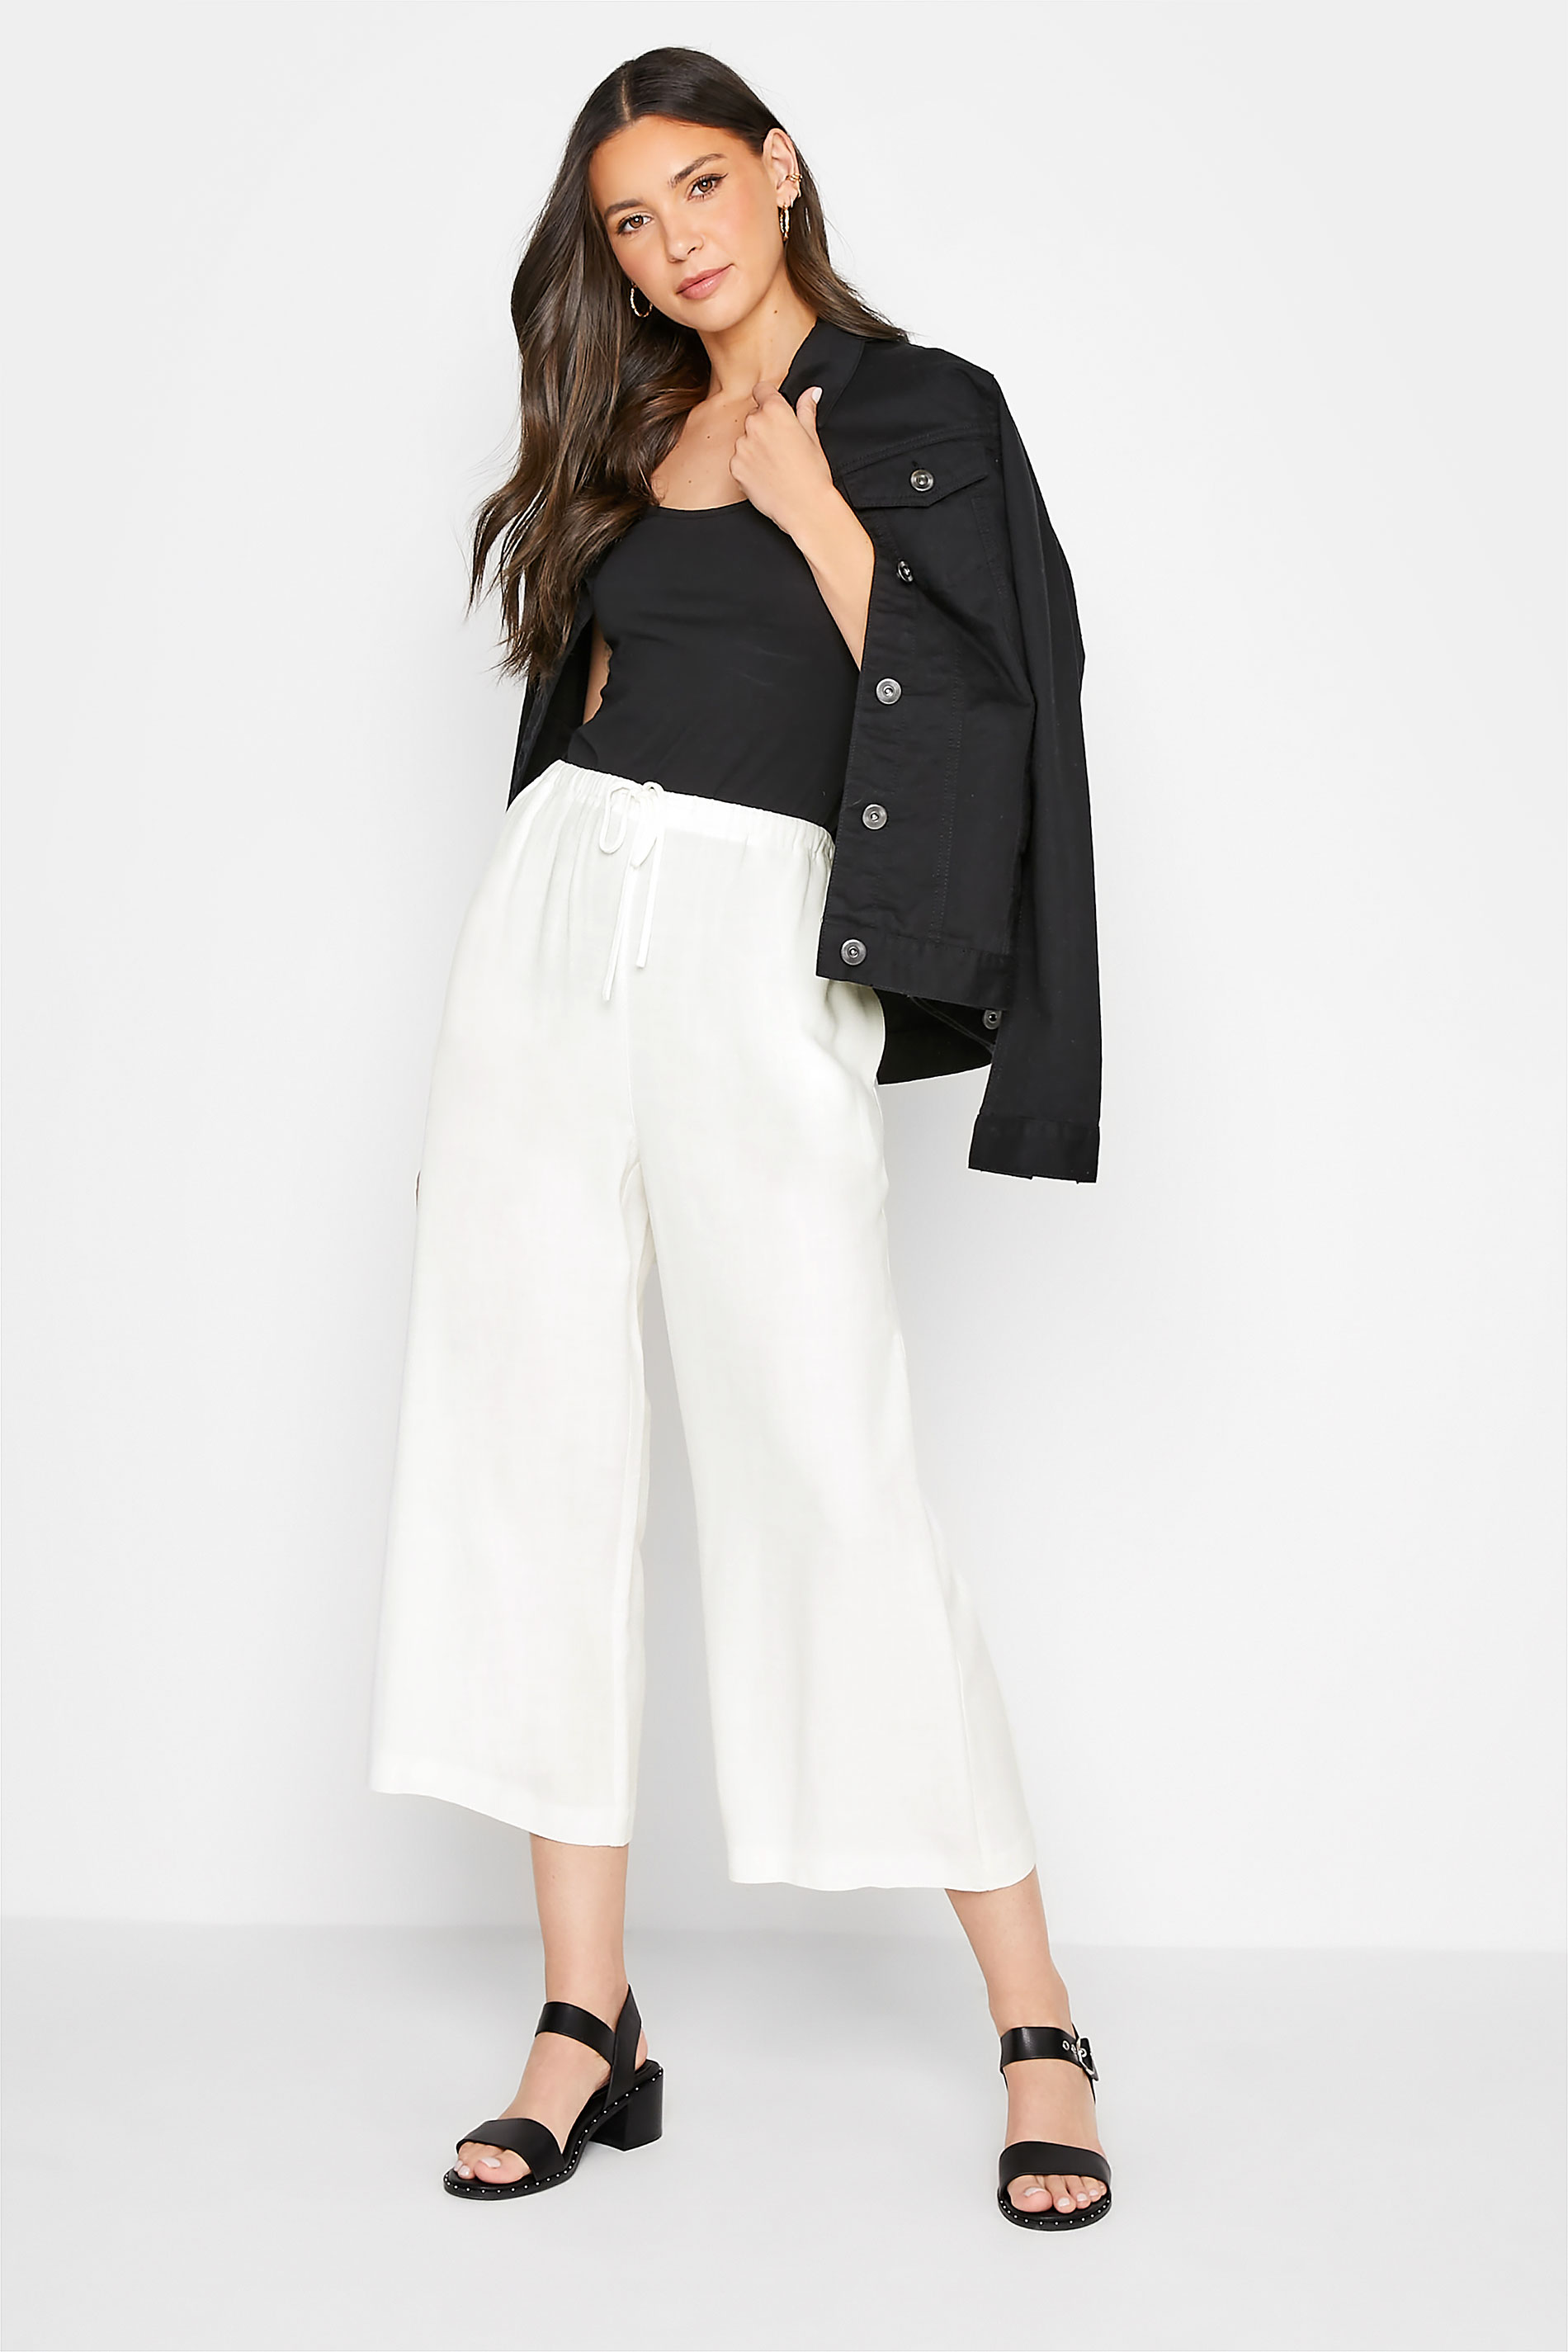 LTS Tall Women's White Linen Tie Waist Cropped Trousers | Long Tall Sally  2